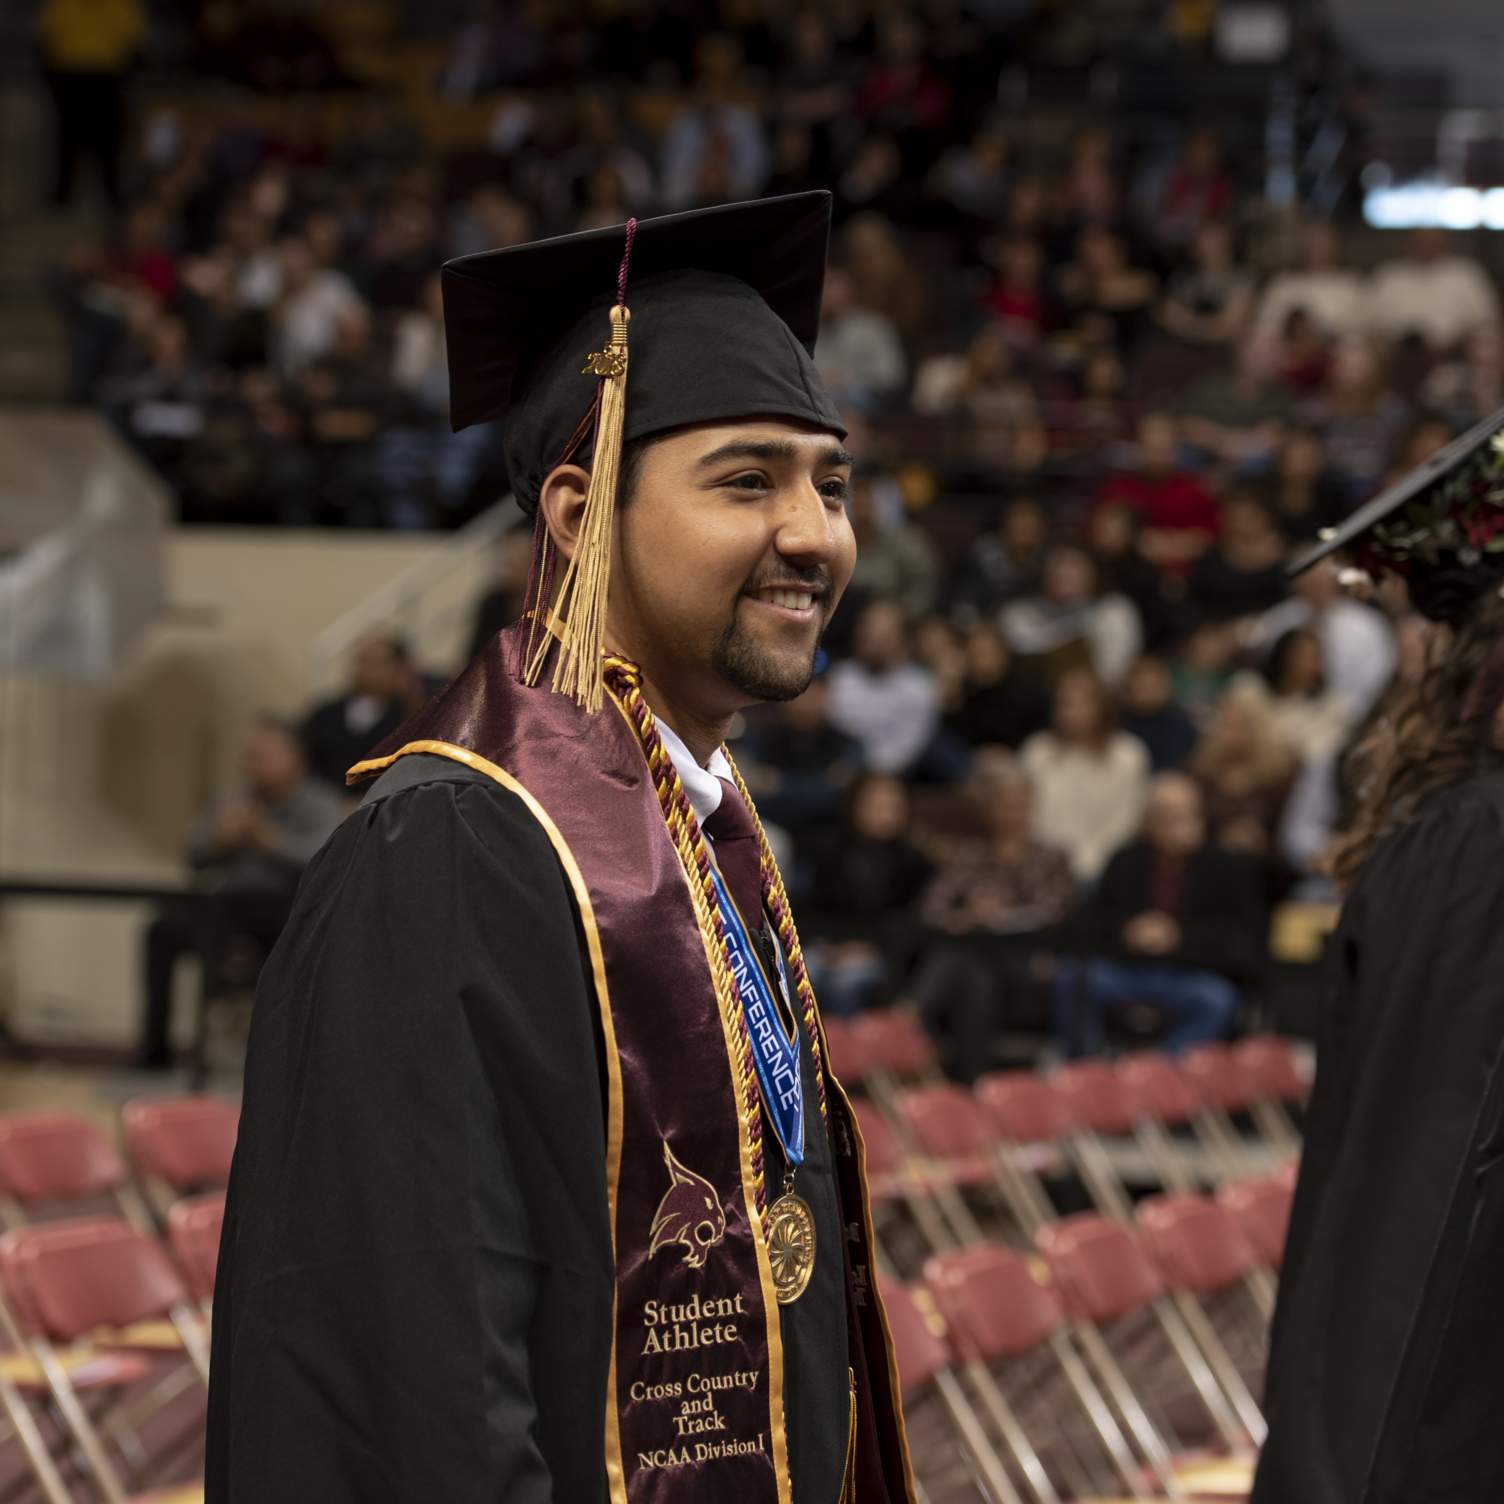 graduate walking down aisle wearing student athlete stole and medal